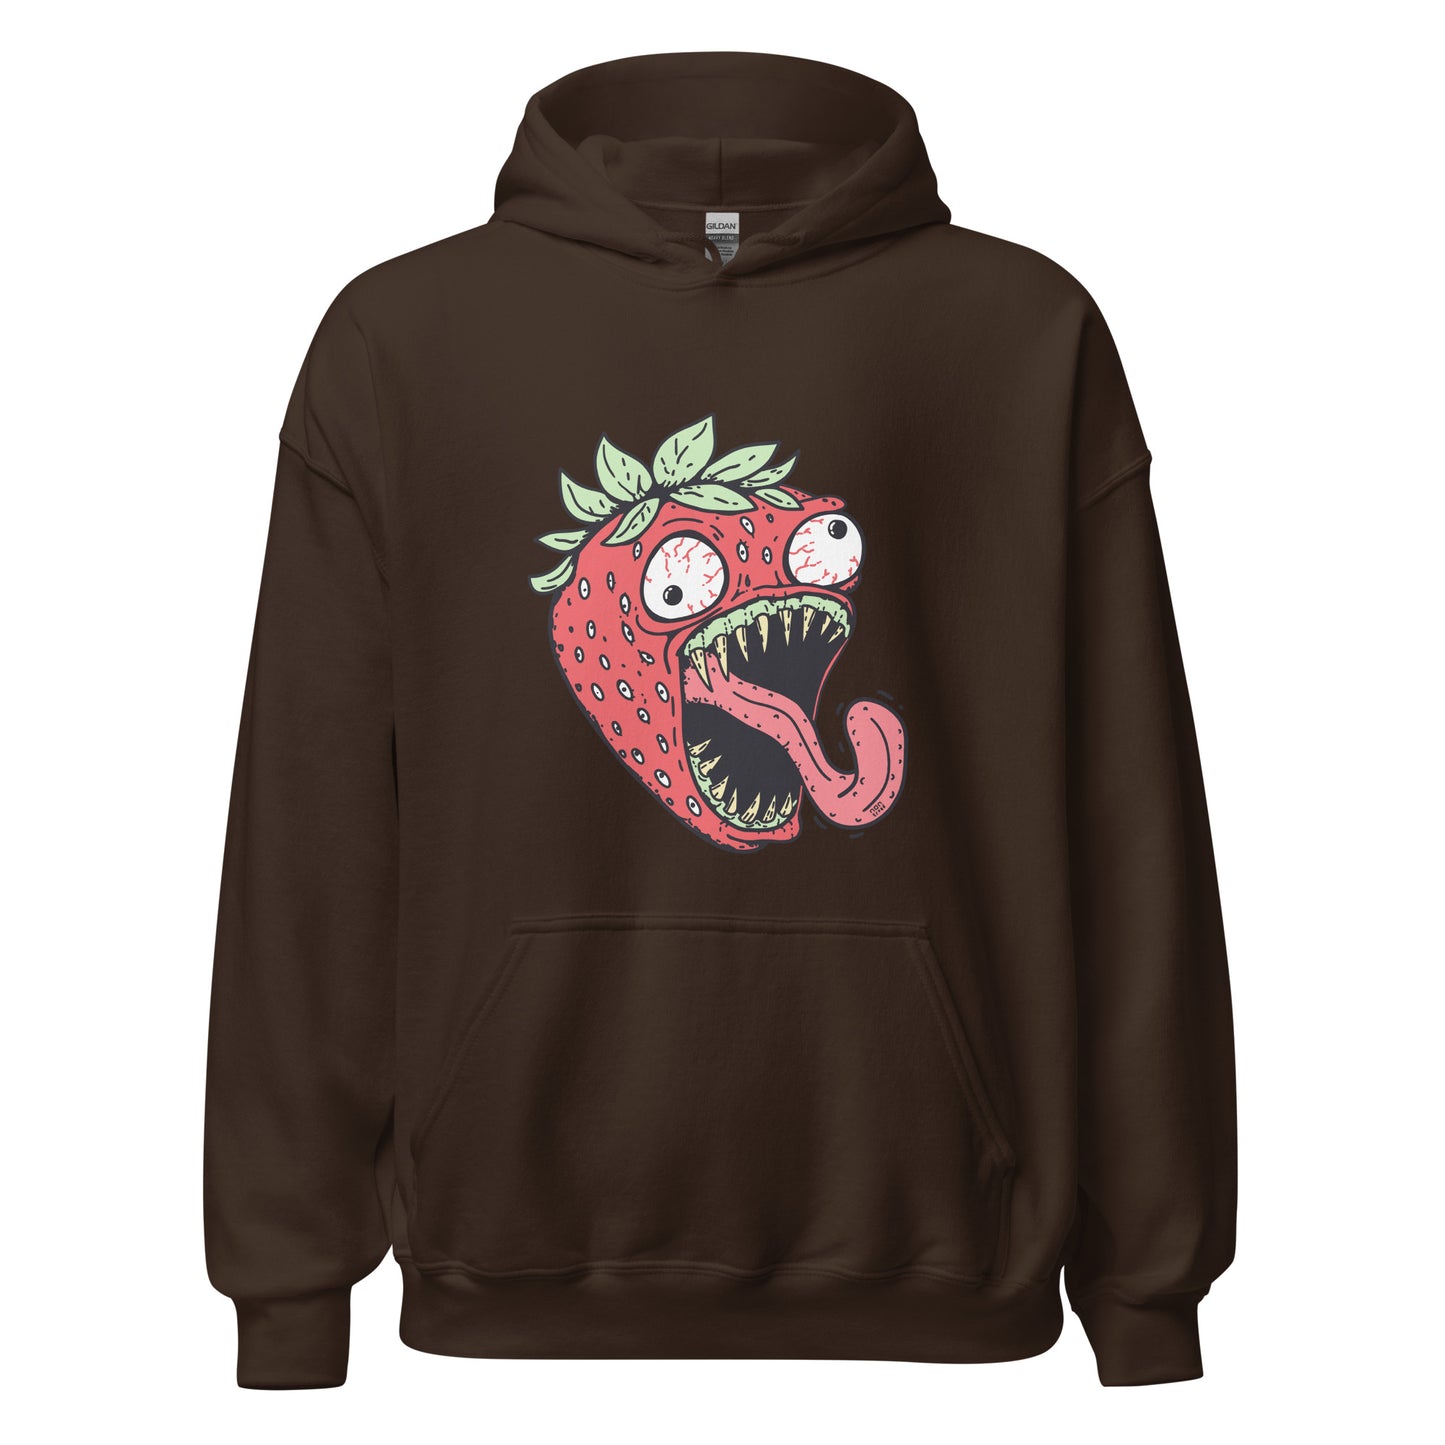 The Strawberry Face Hoodie